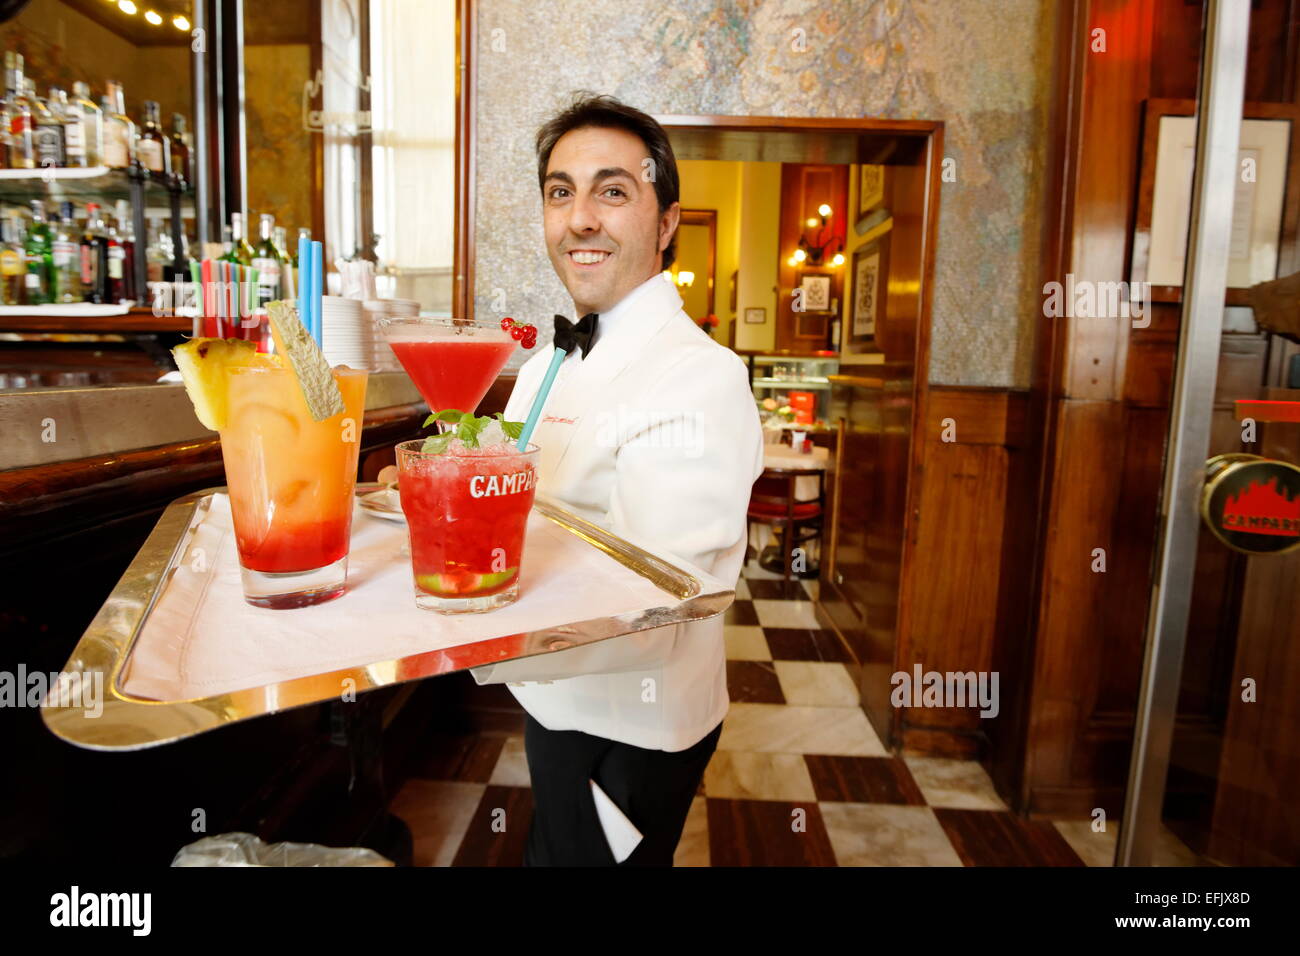 Waiter serving several drinks in a bar, Galleria Vittorio Emanuele II, Milan, Lombardy, Italy Stock Photo